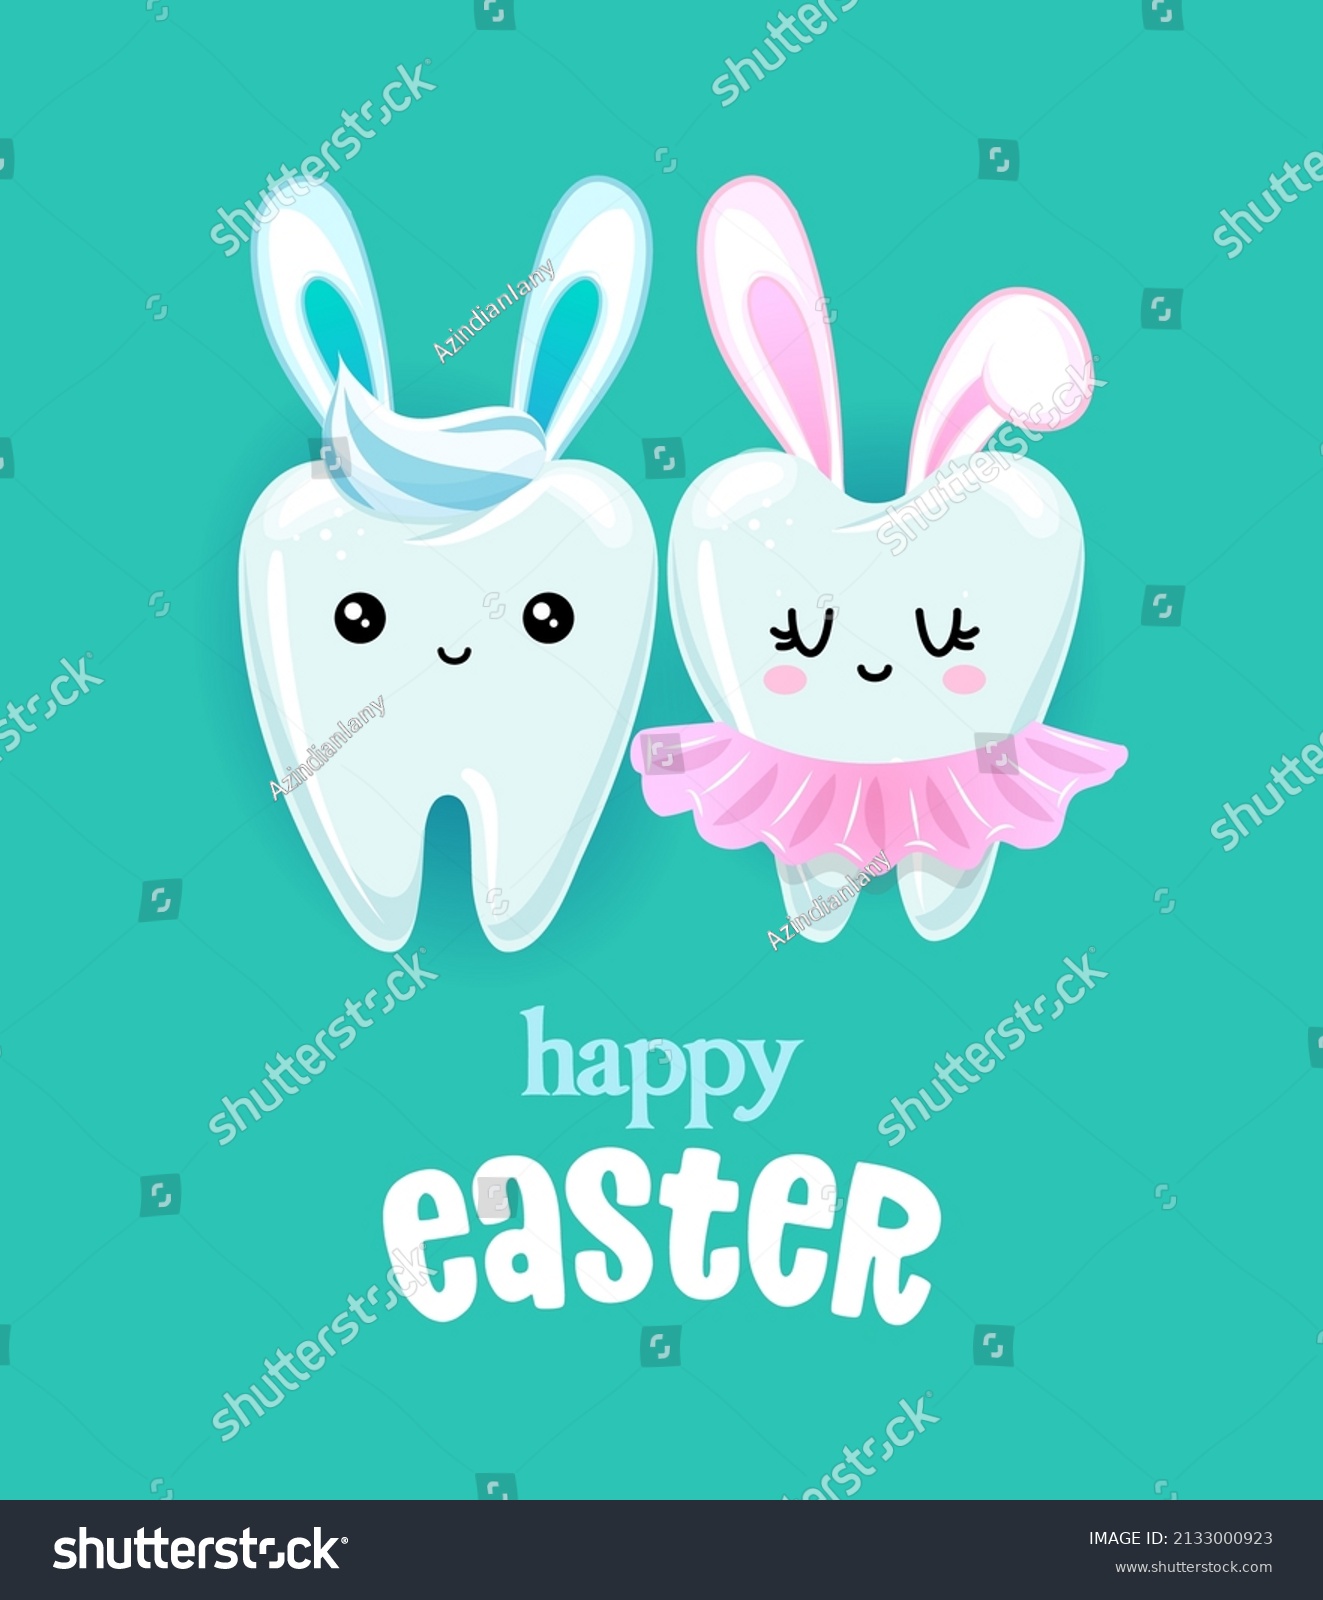 SVG of Happy Easter - Tooth couple character design in kawaii style. Hand drawn Tooth fairy with funny quote. Good for school prevention posters, greeting cards, banners, textiles. svg